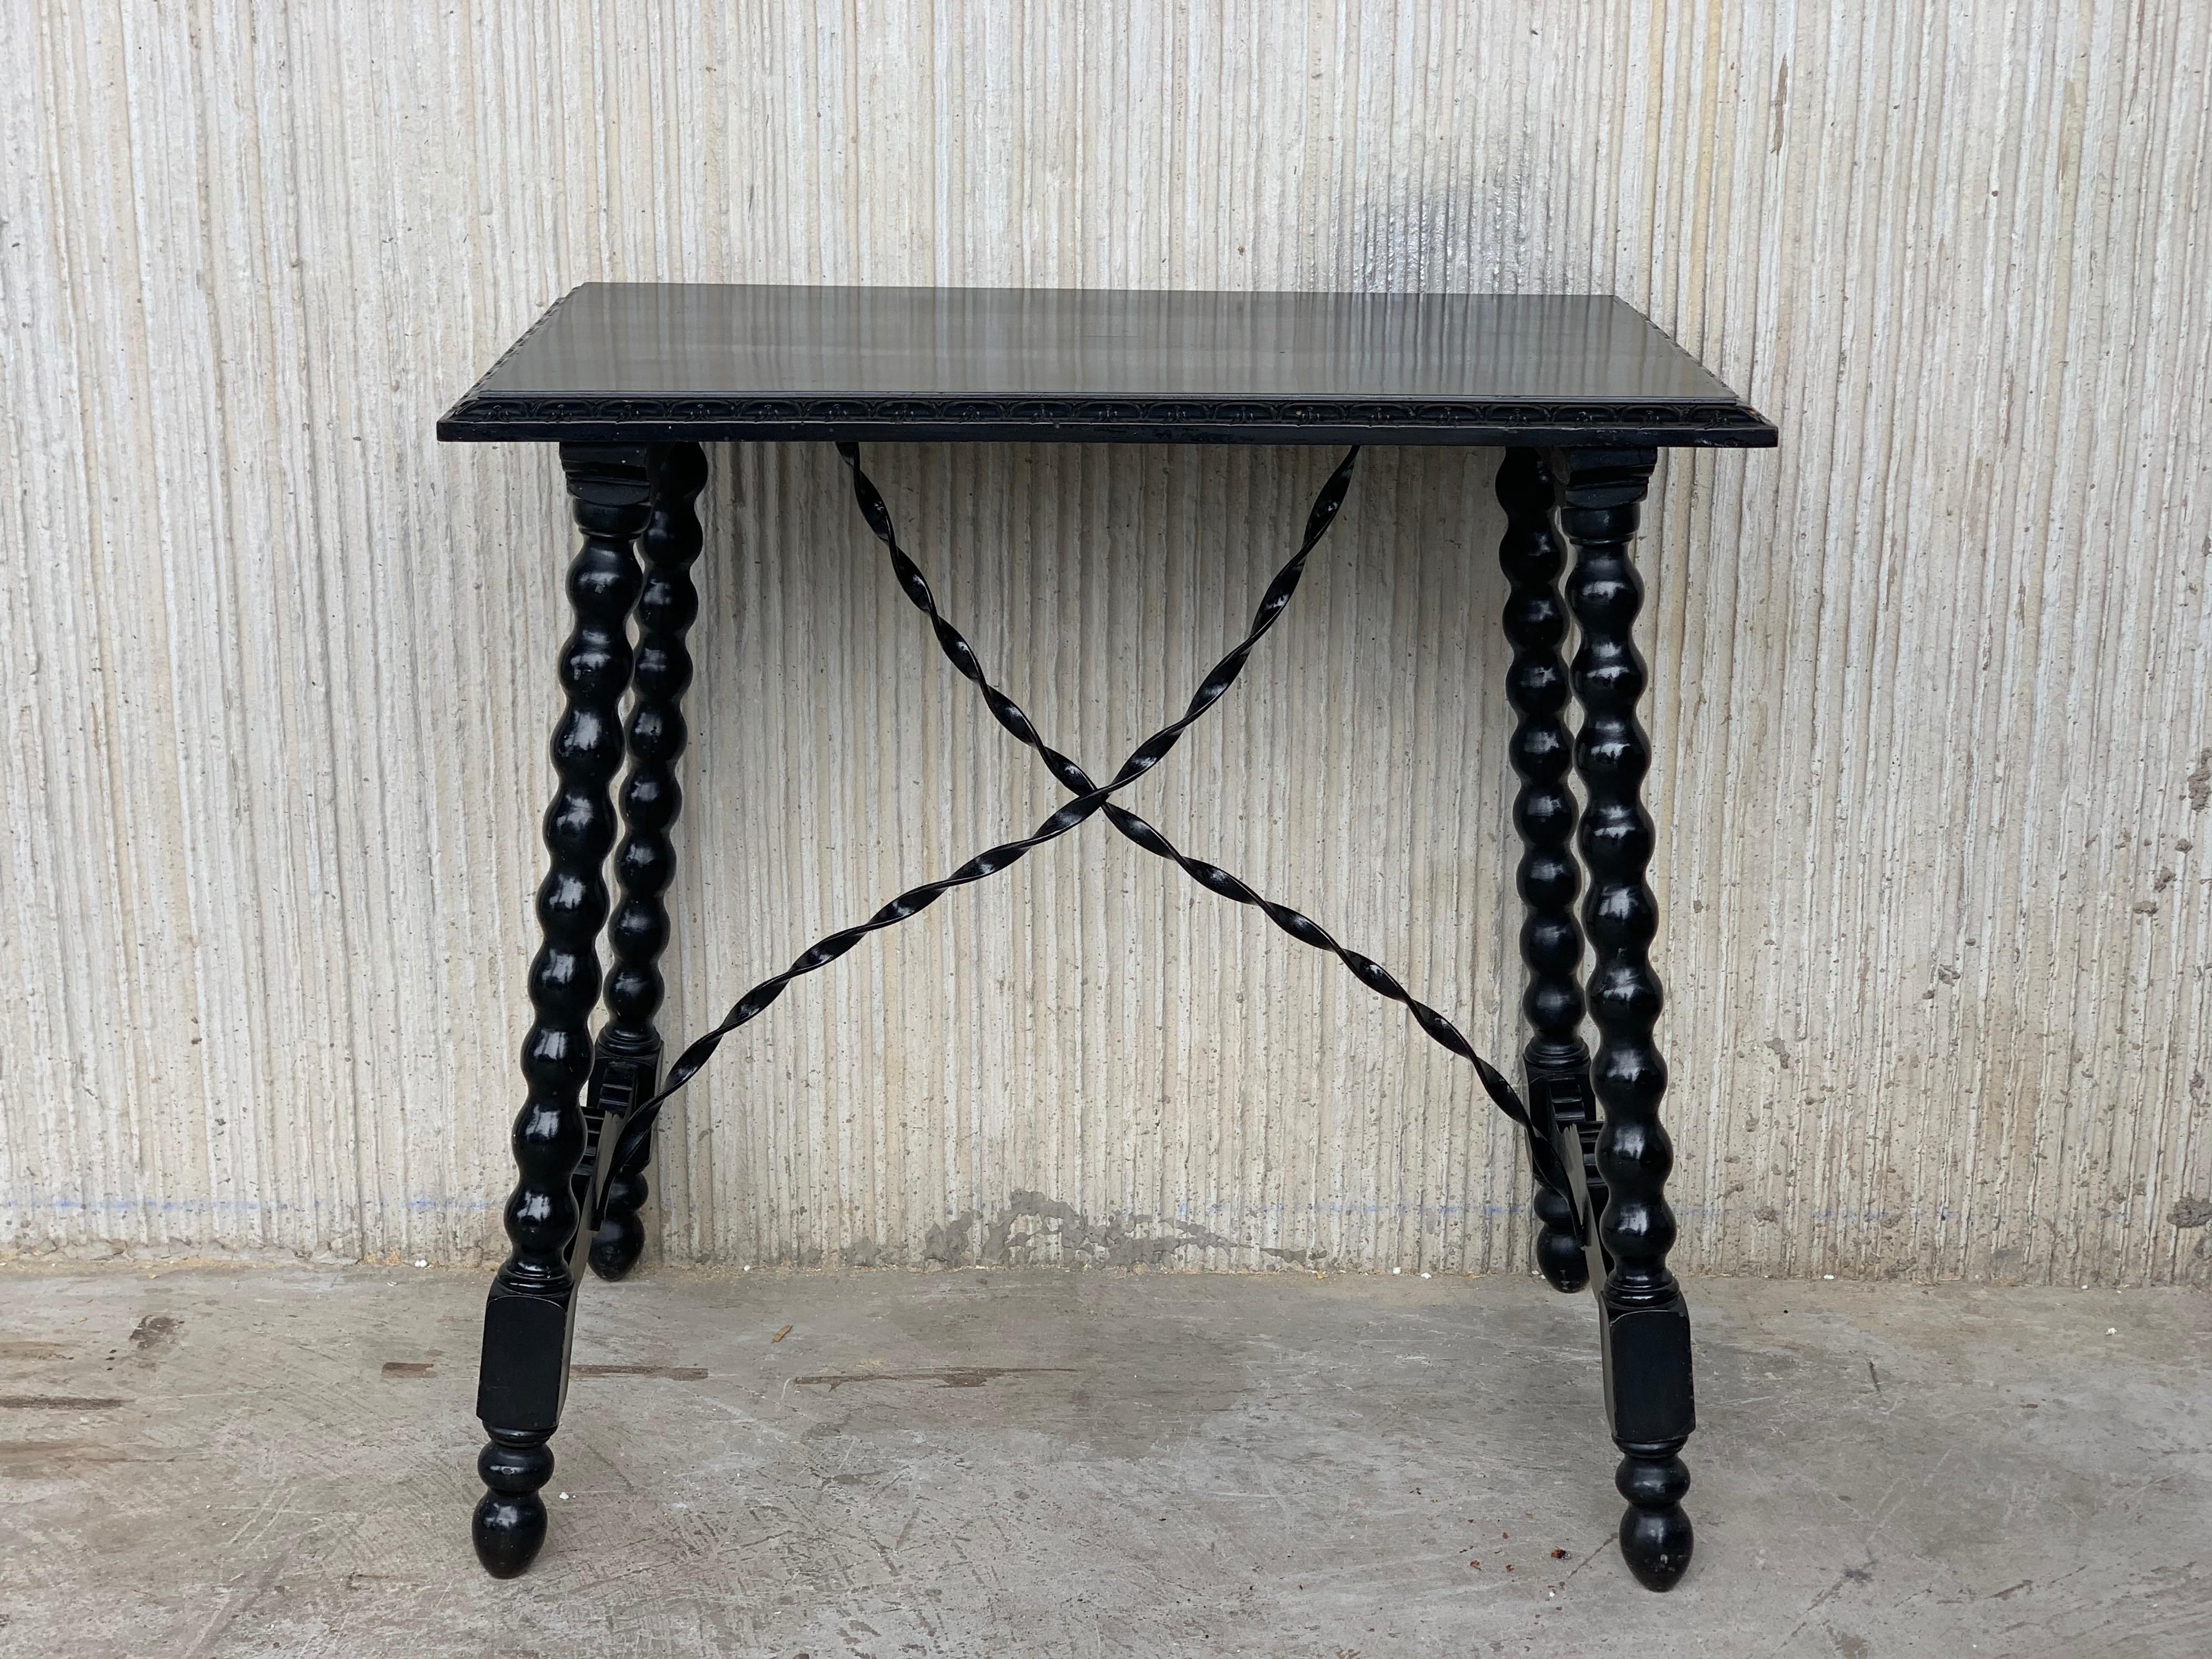 20th century Spanish baroque ebonized side table with iron stretcher and carved top in black ebonized walnut.